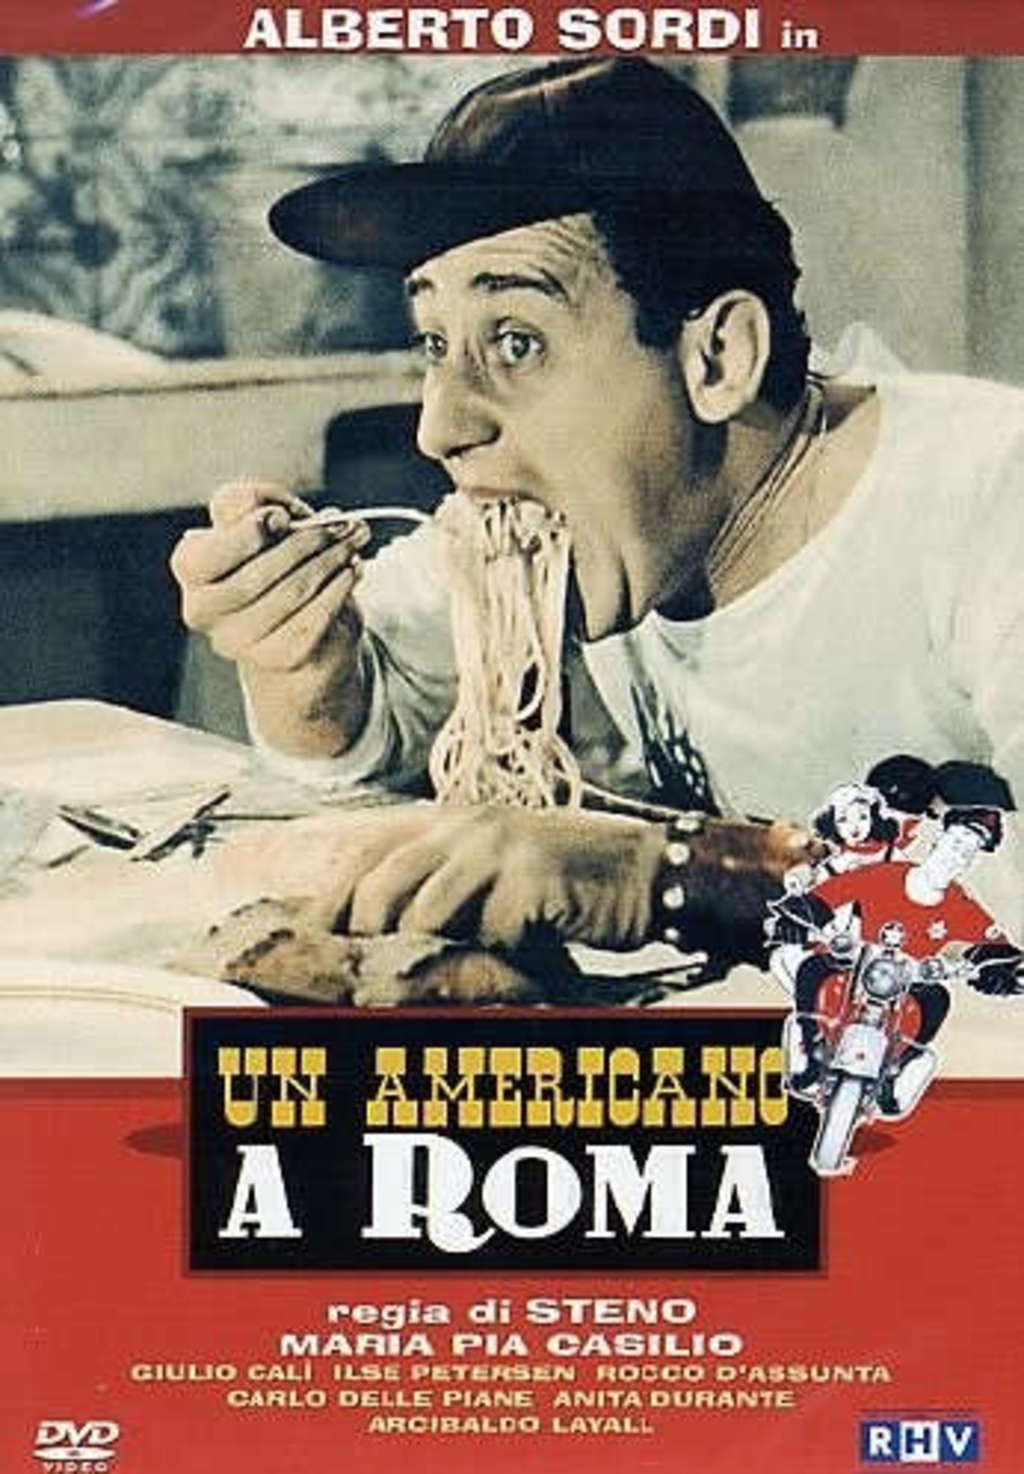 Watch An American in Rome on Netflix Today! | NetflixMovies.com